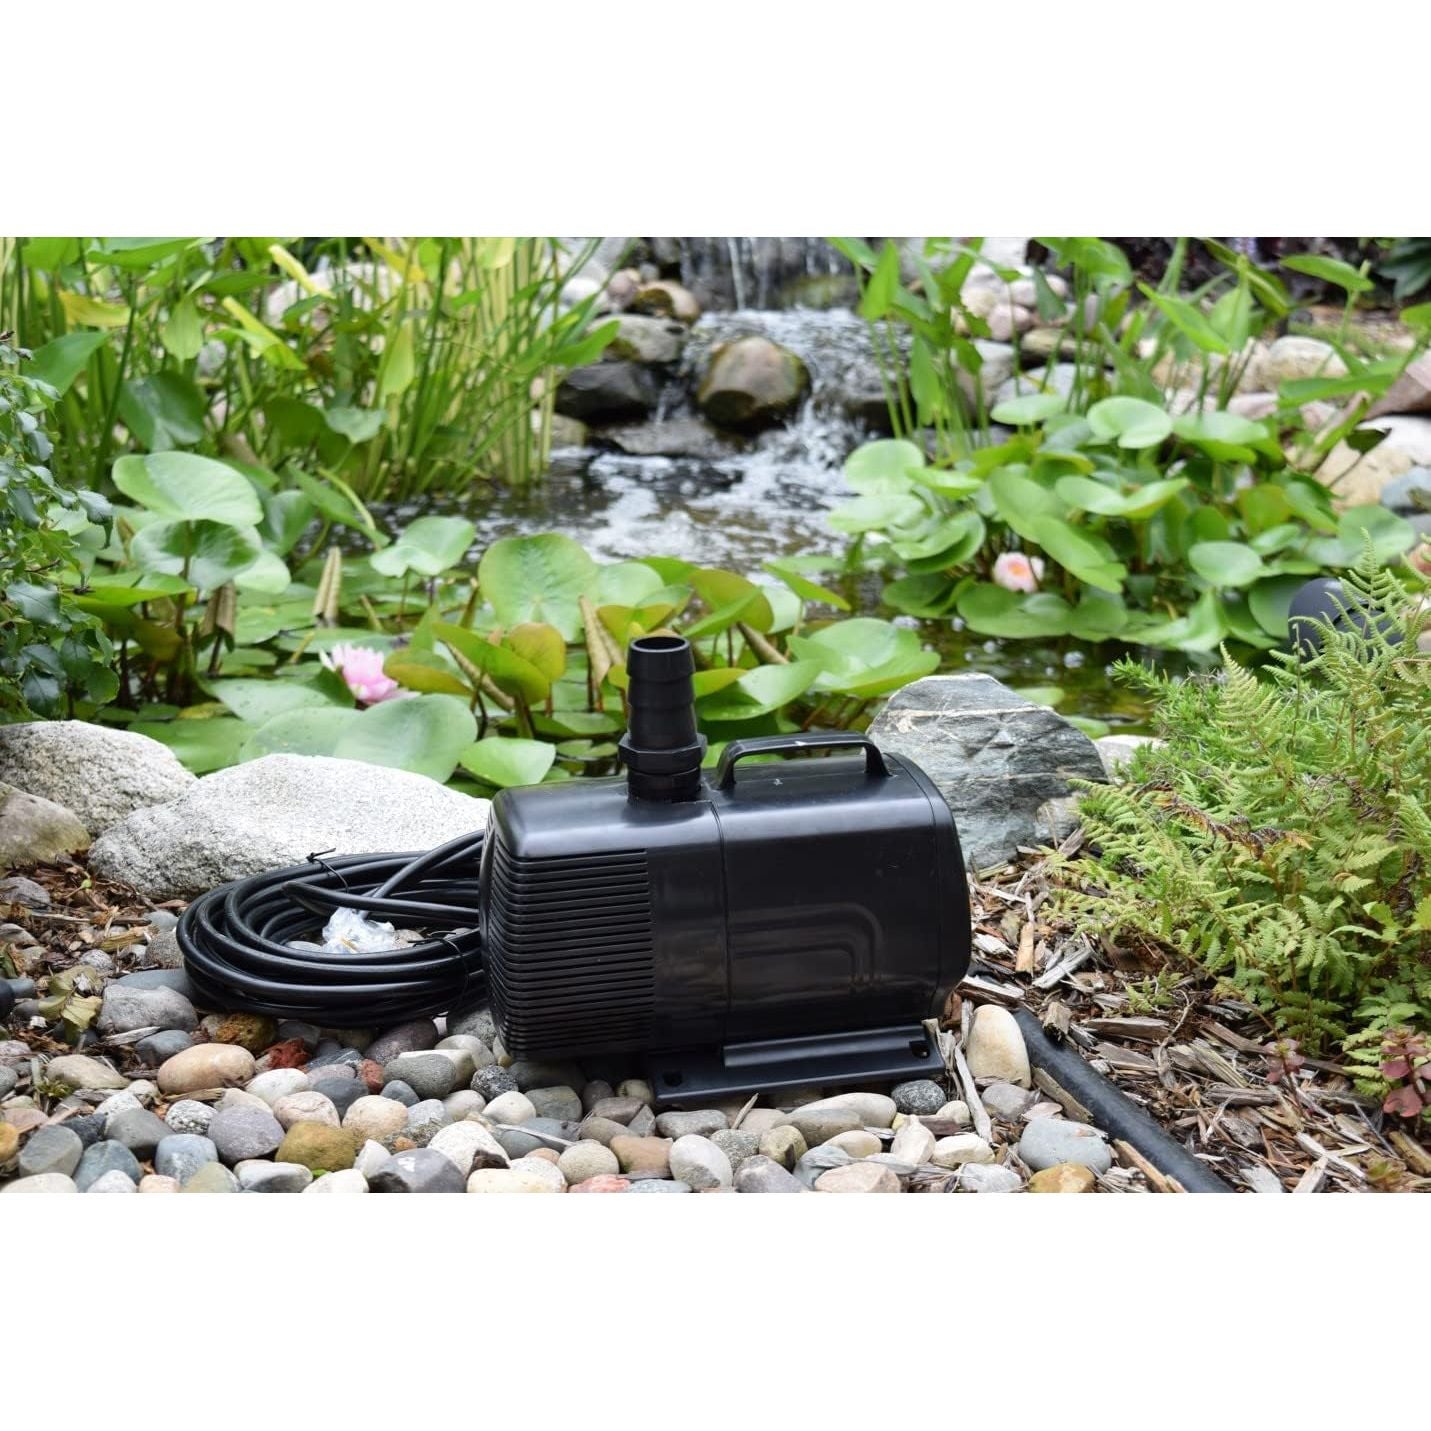 Submersible Mag Drive Pump 1050 GPH | Reliable | Quiet & Energy Efficient - American Pond Supplies Easy Pro Mag Drive Pumps Mag Drive Pumps